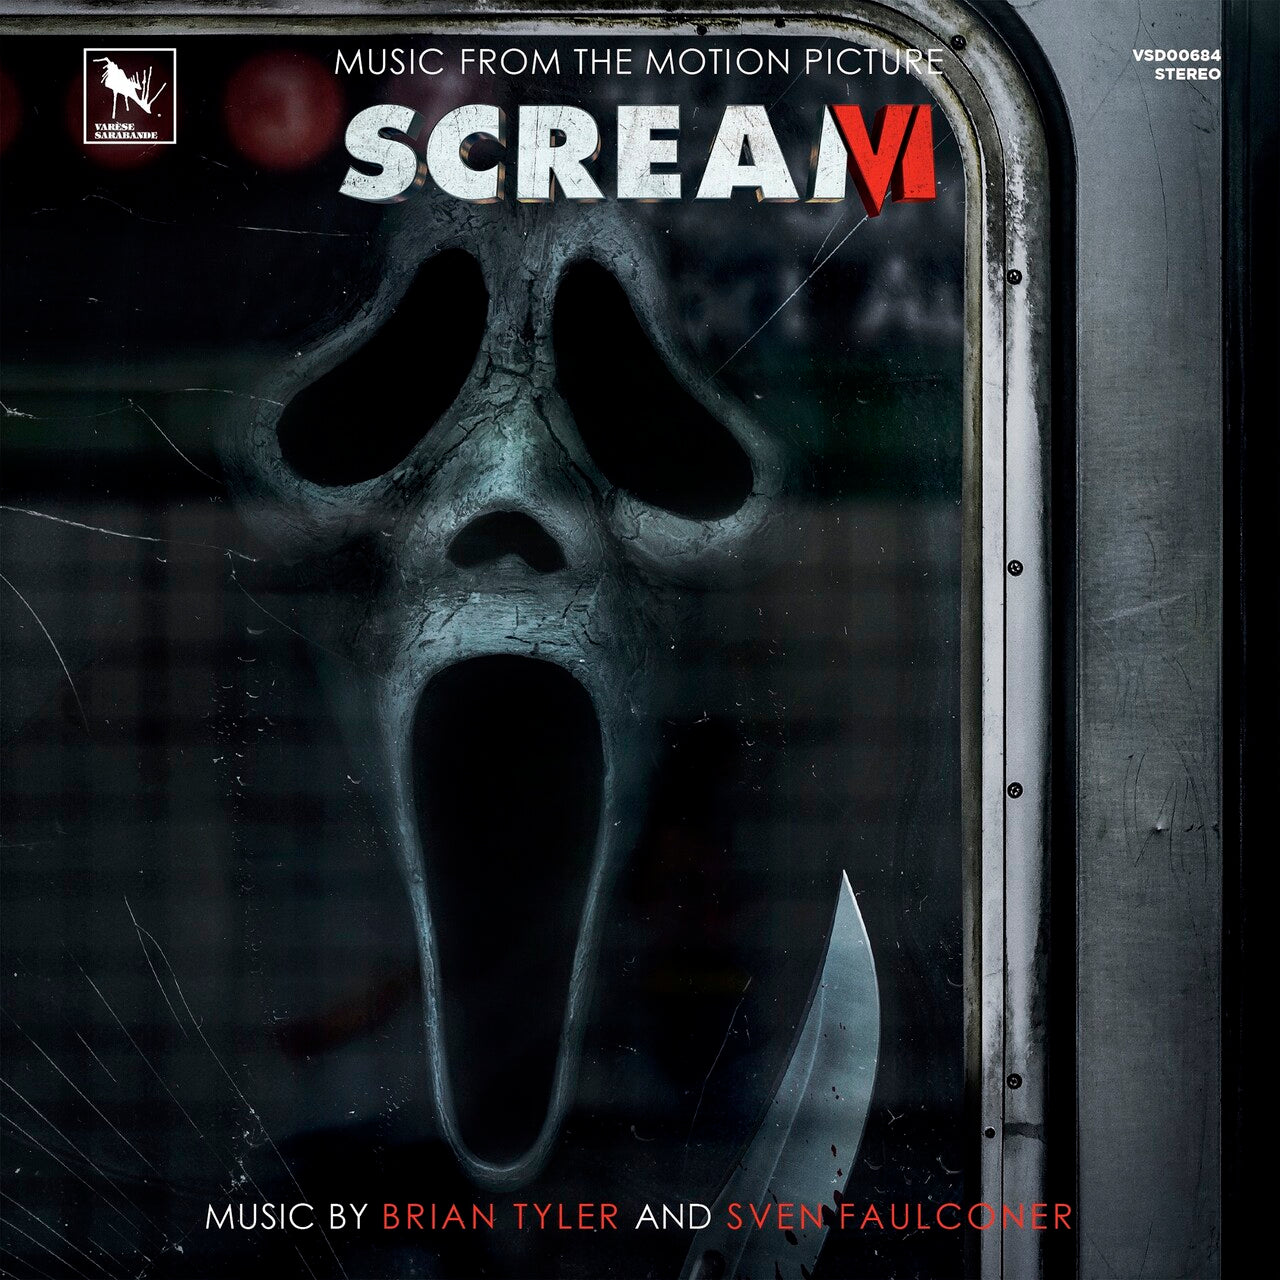 Brian Tyler, Sven Faulconer - Scream VI (Music From The Motion Picture): 2CD